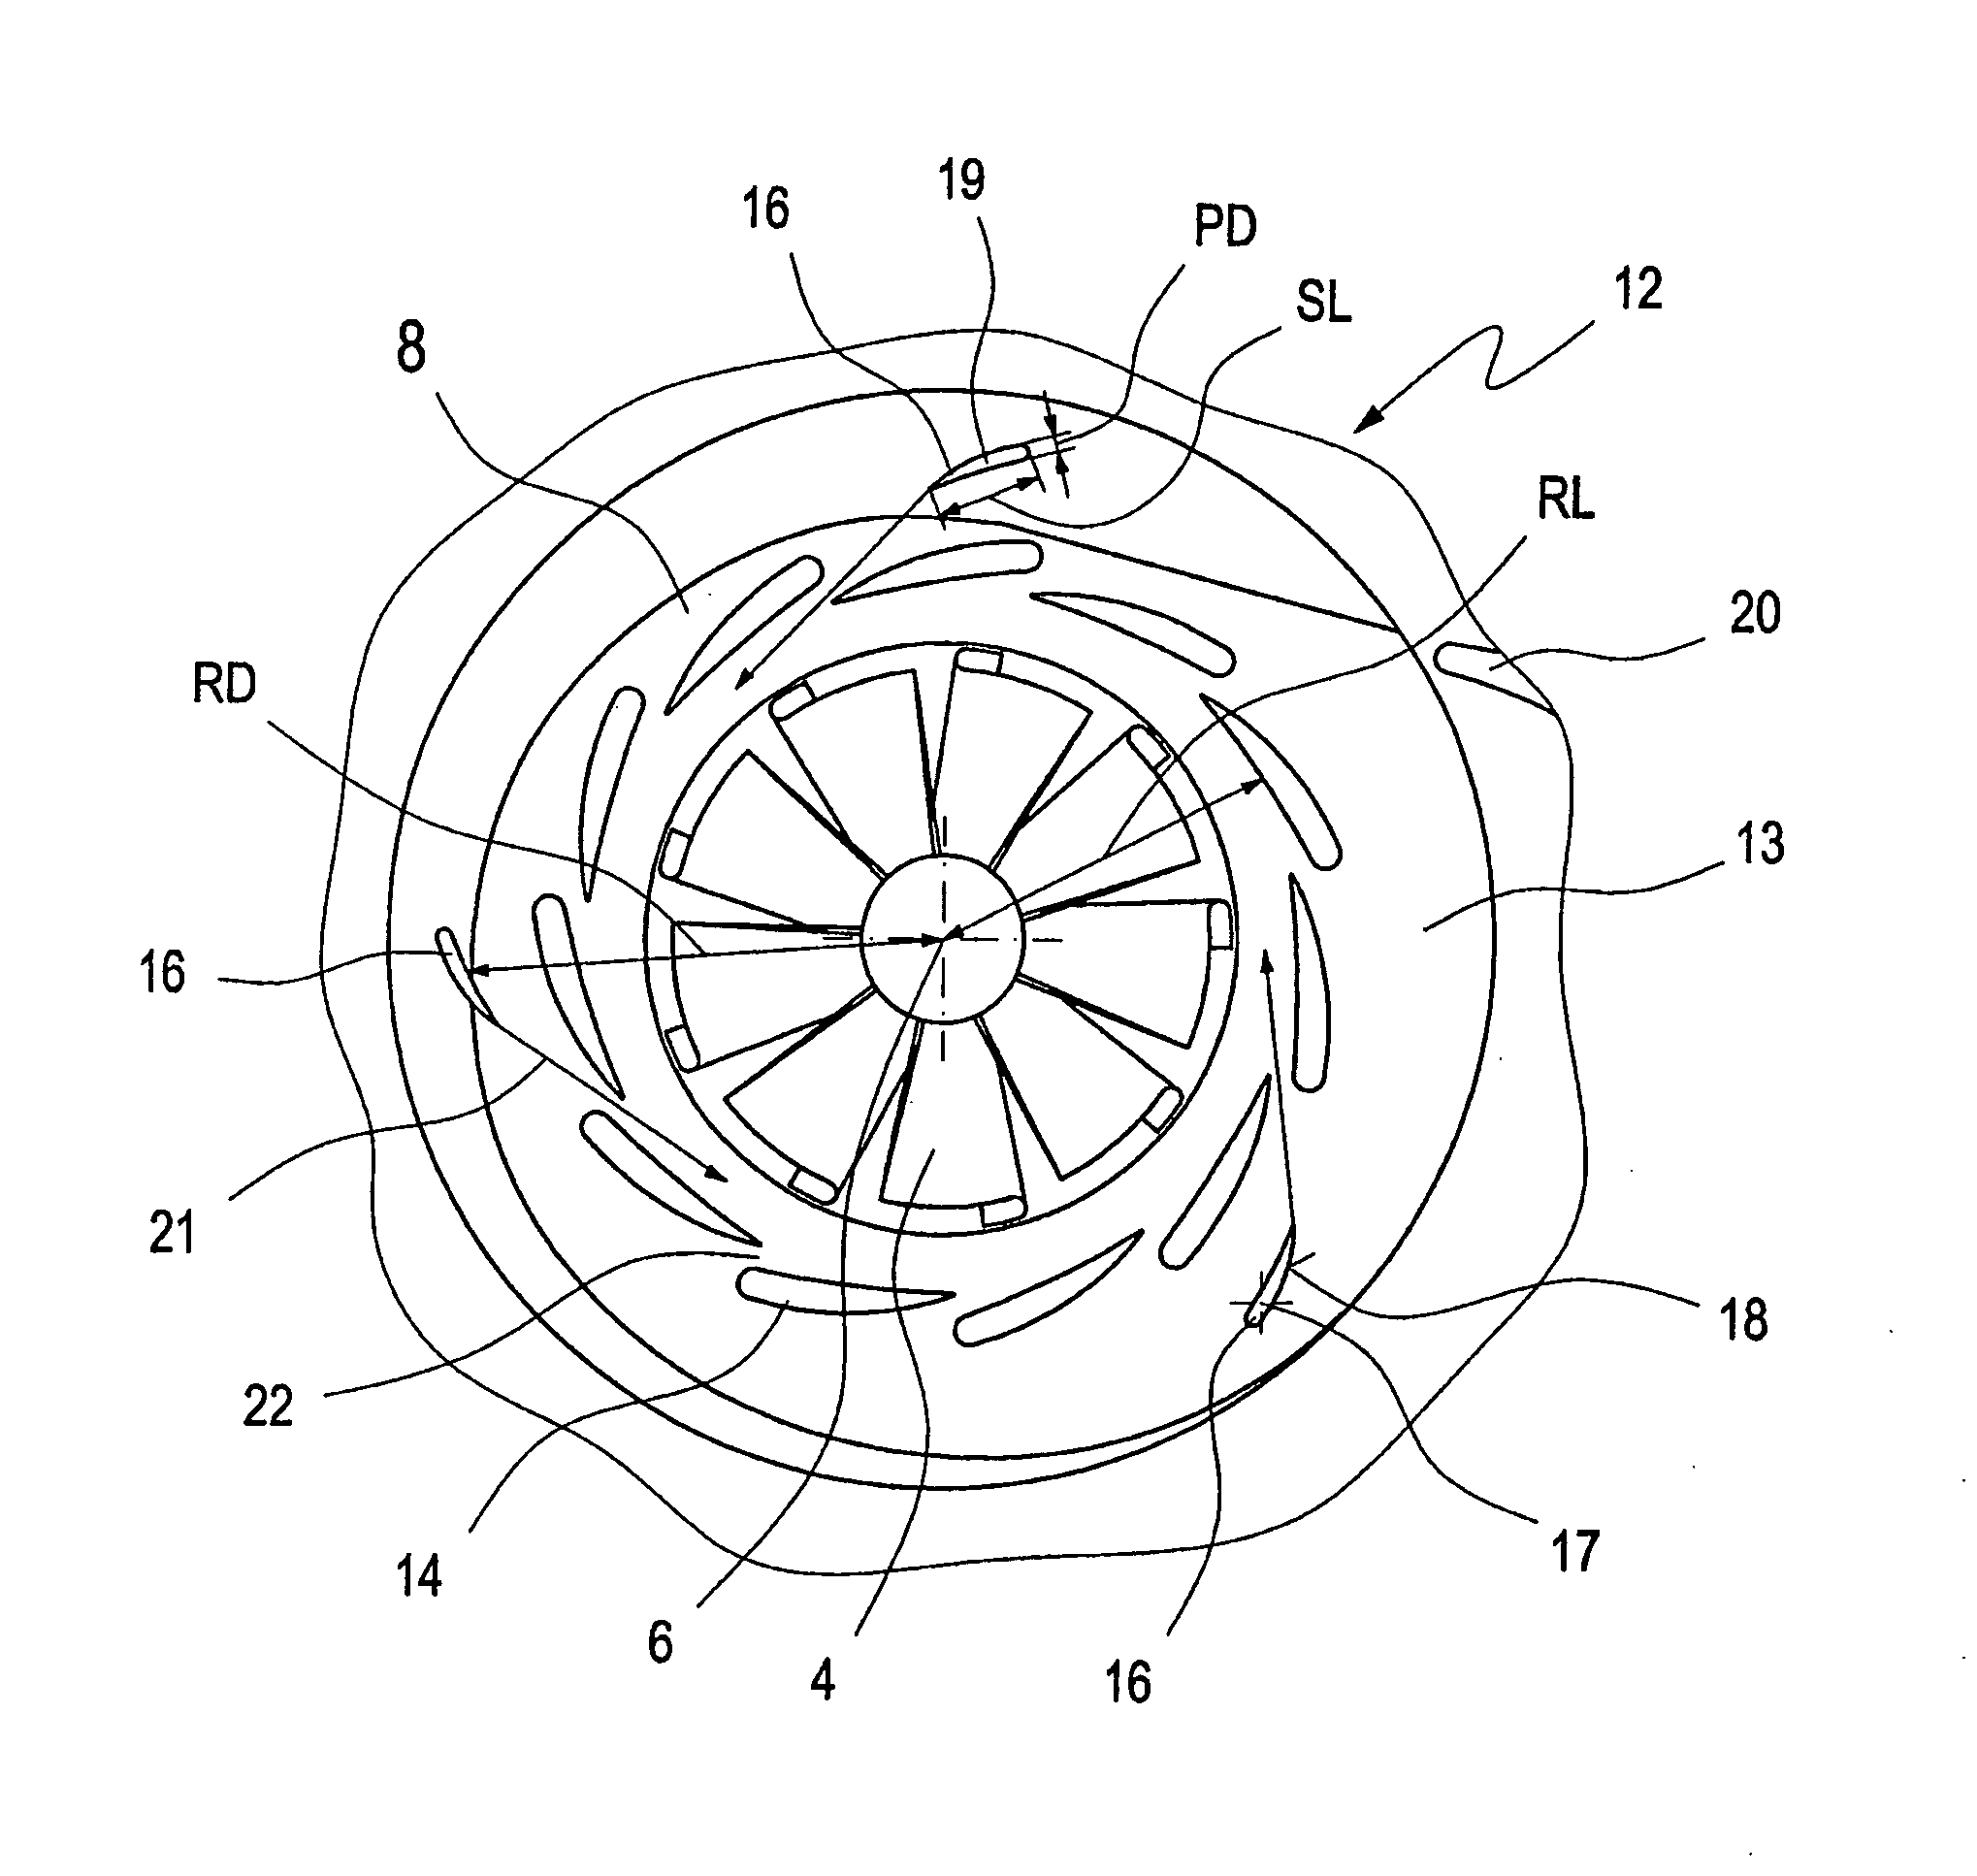 Exhaust gas turbocharger for an internal combustion engine